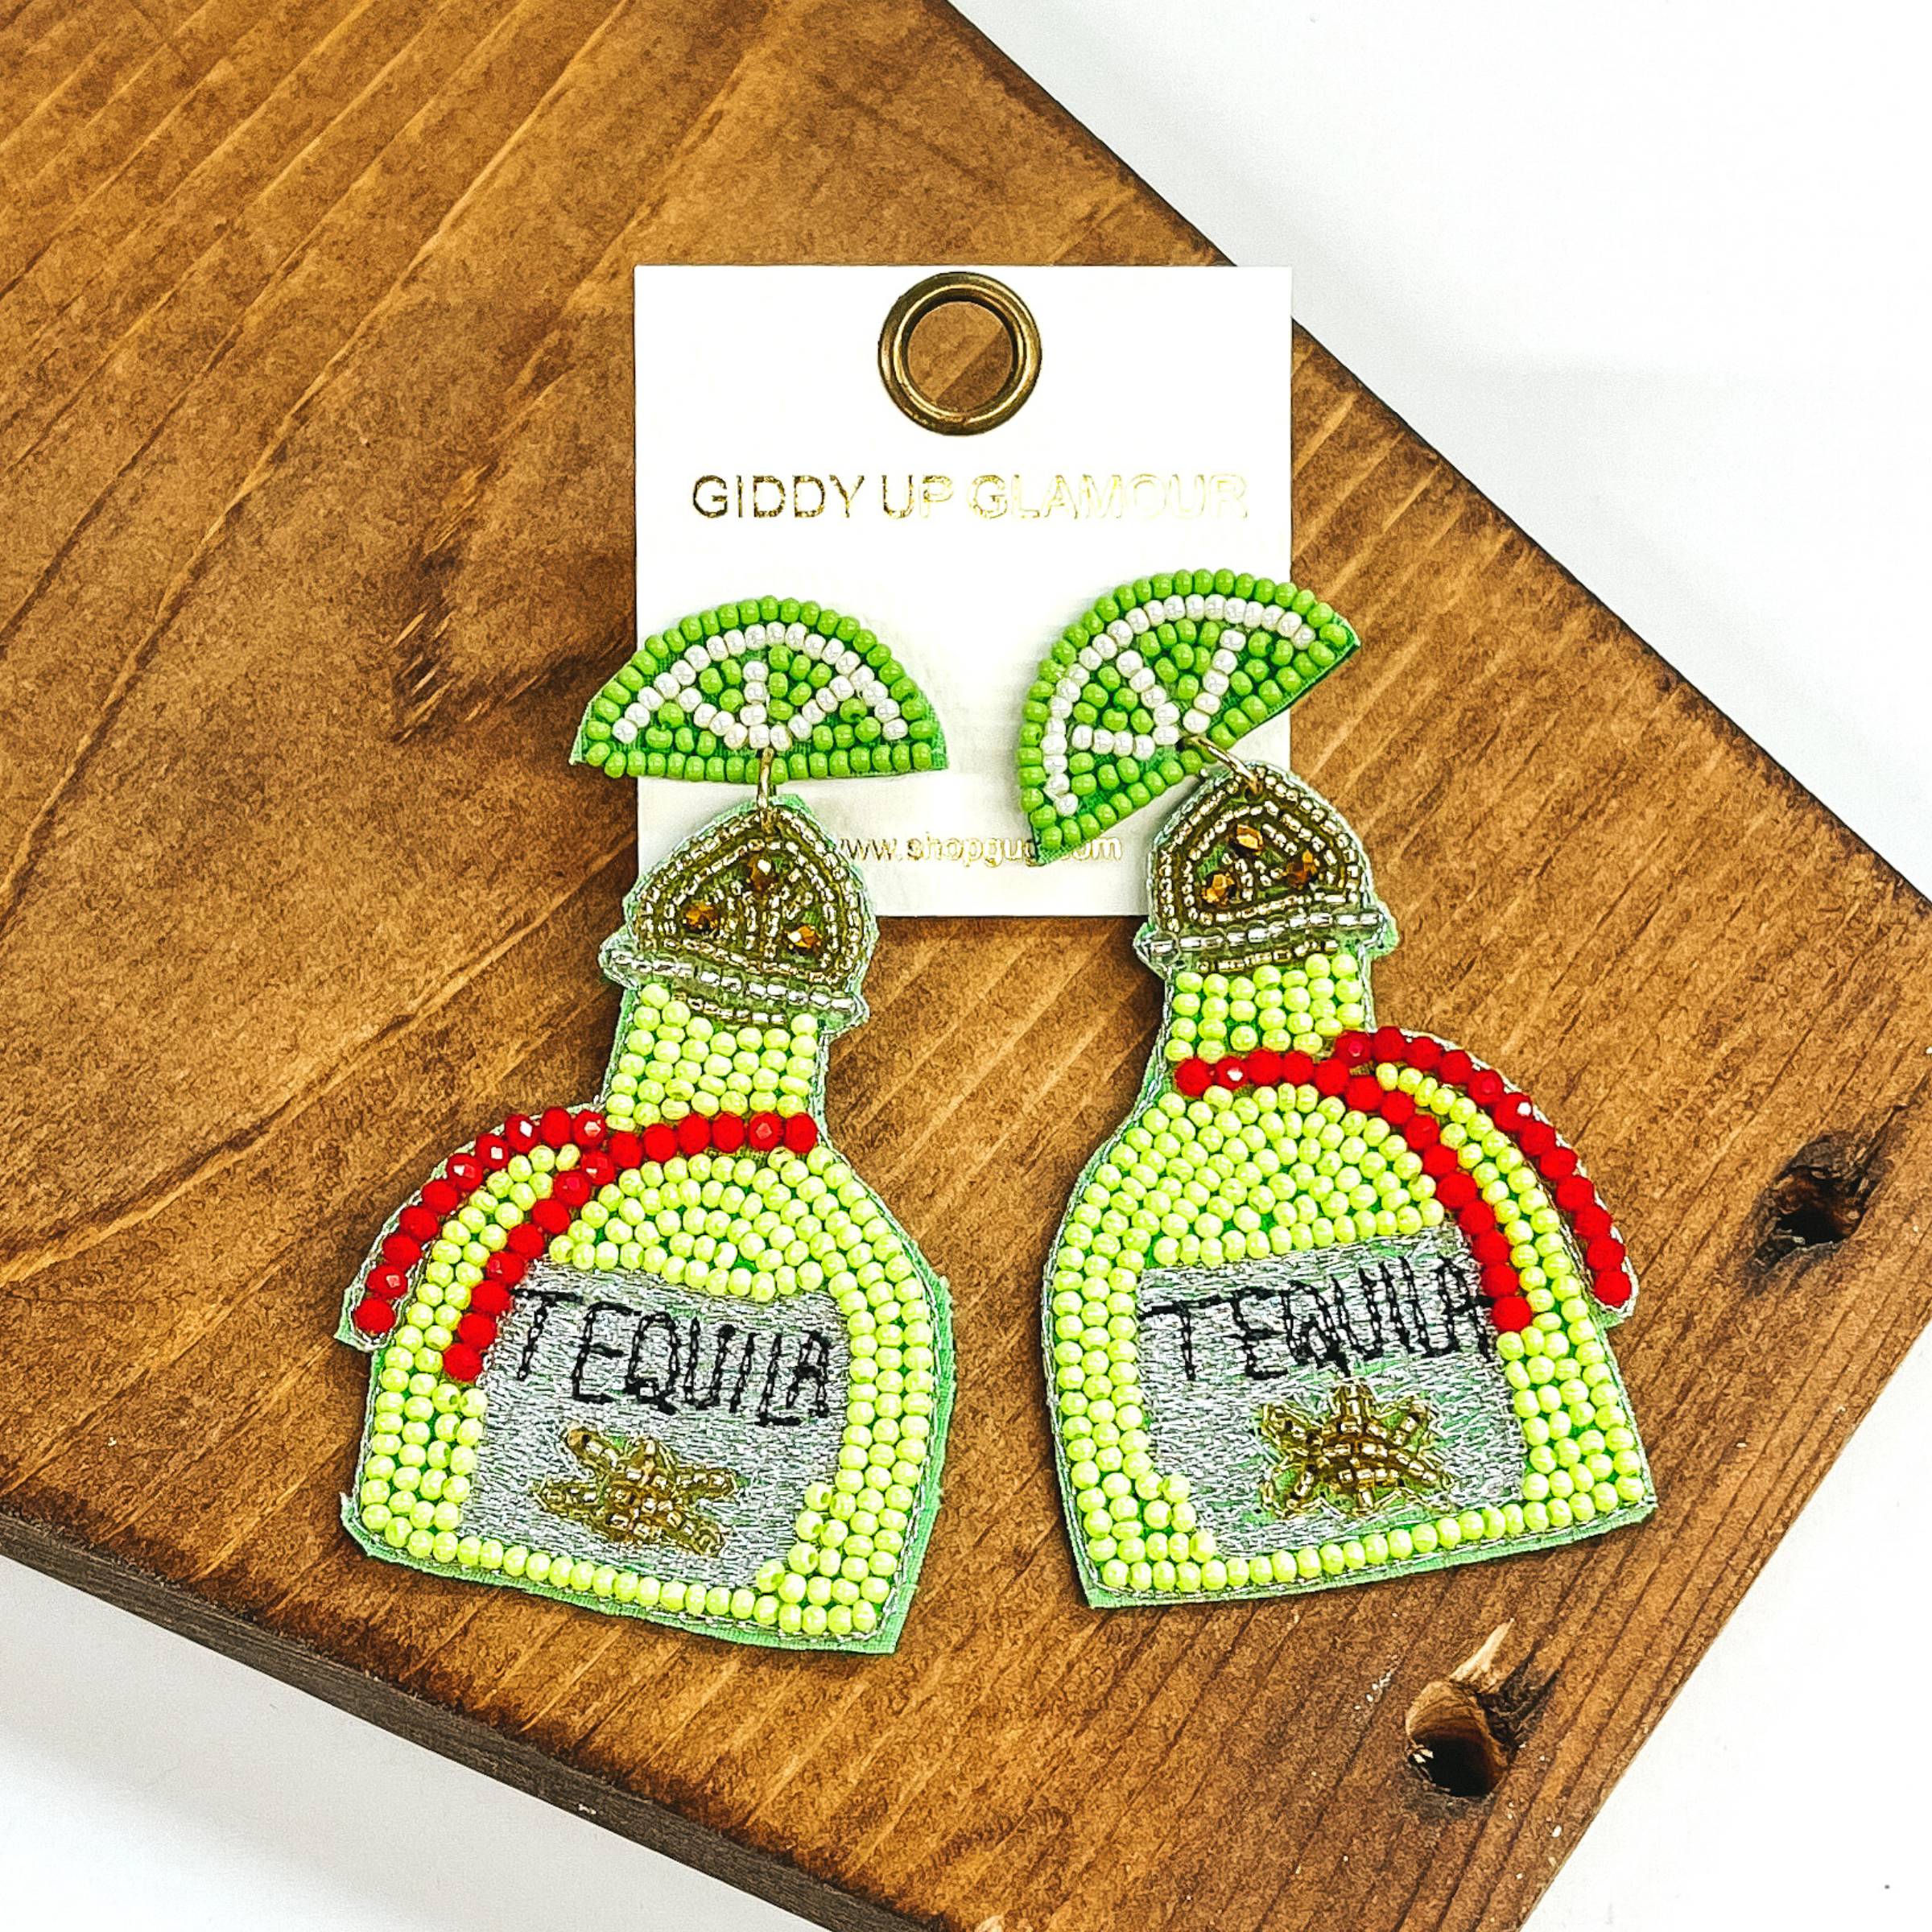 Light green beaded lime stud earrings with hanging beaded bottle. The bottle has a gold beaded top with a lime green beaded body with red beadedstripes. The center on the bottom is grey stitched with the word "TEQUILA" stitched in black. These earrings are pictured on a dark brown object on a white background.